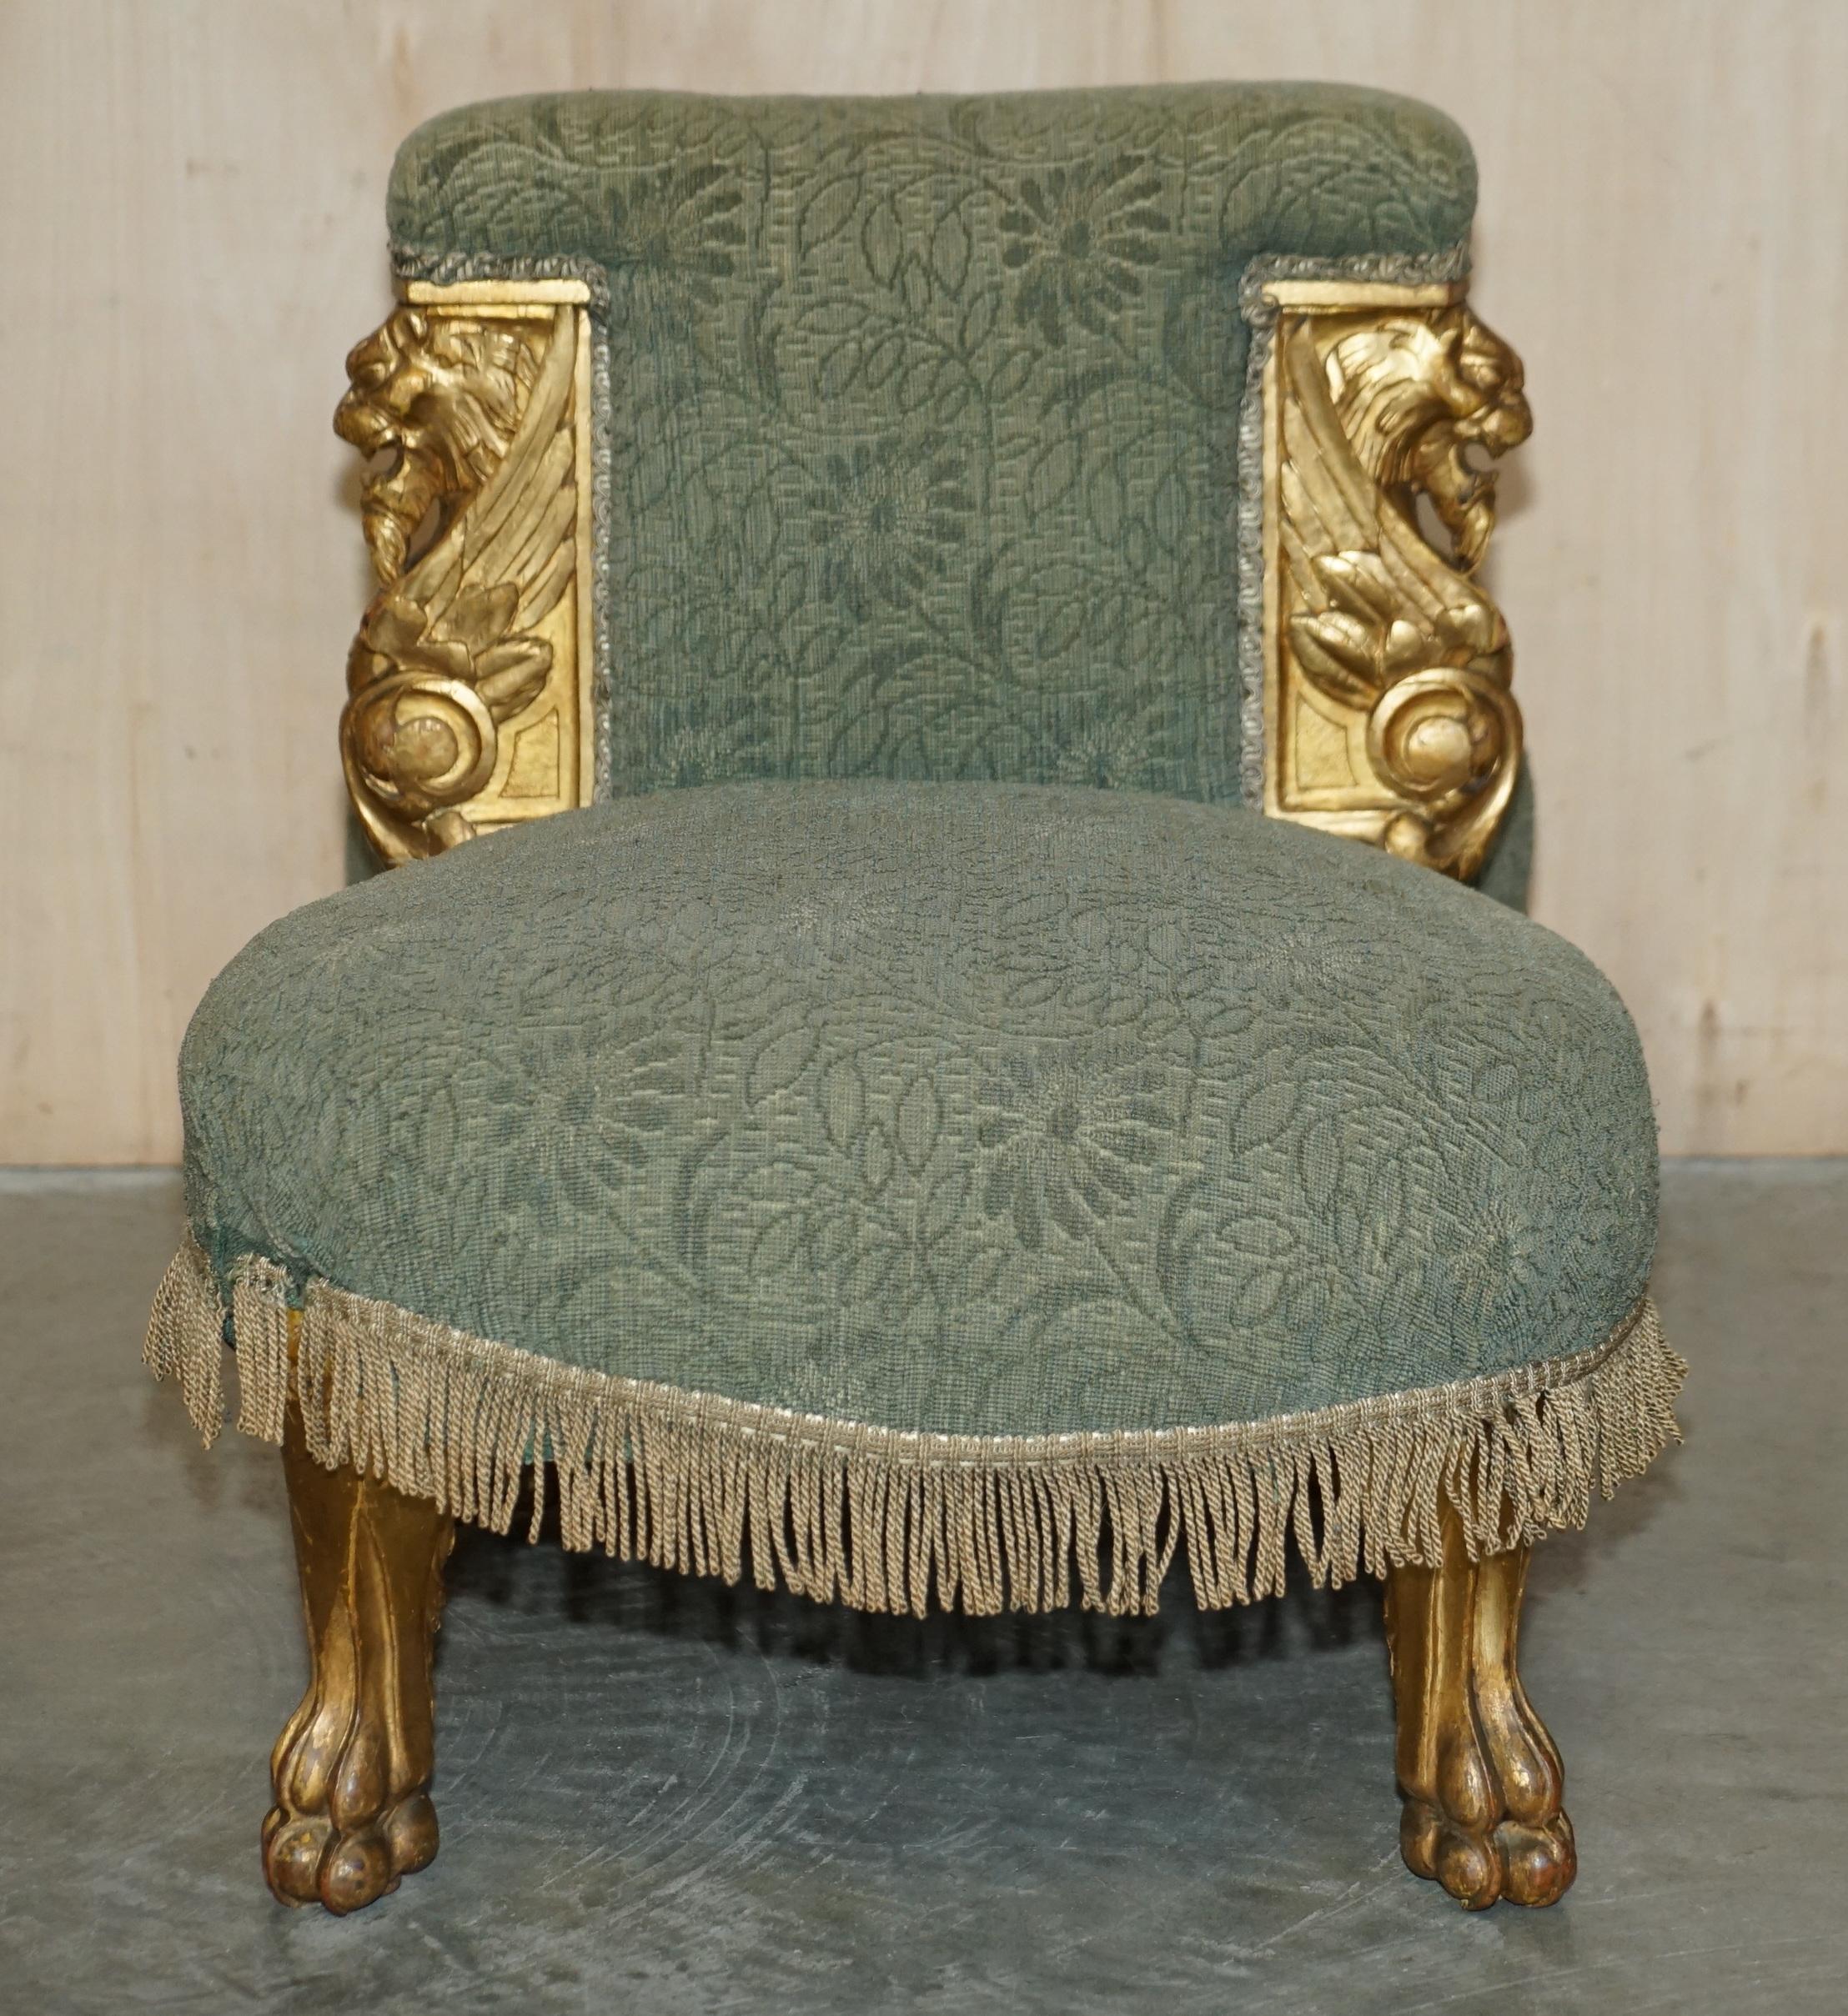 Important 18th Century circa 1740 Hand Carved Italian Giltwood Tete a Tete Sofa For Sale 6